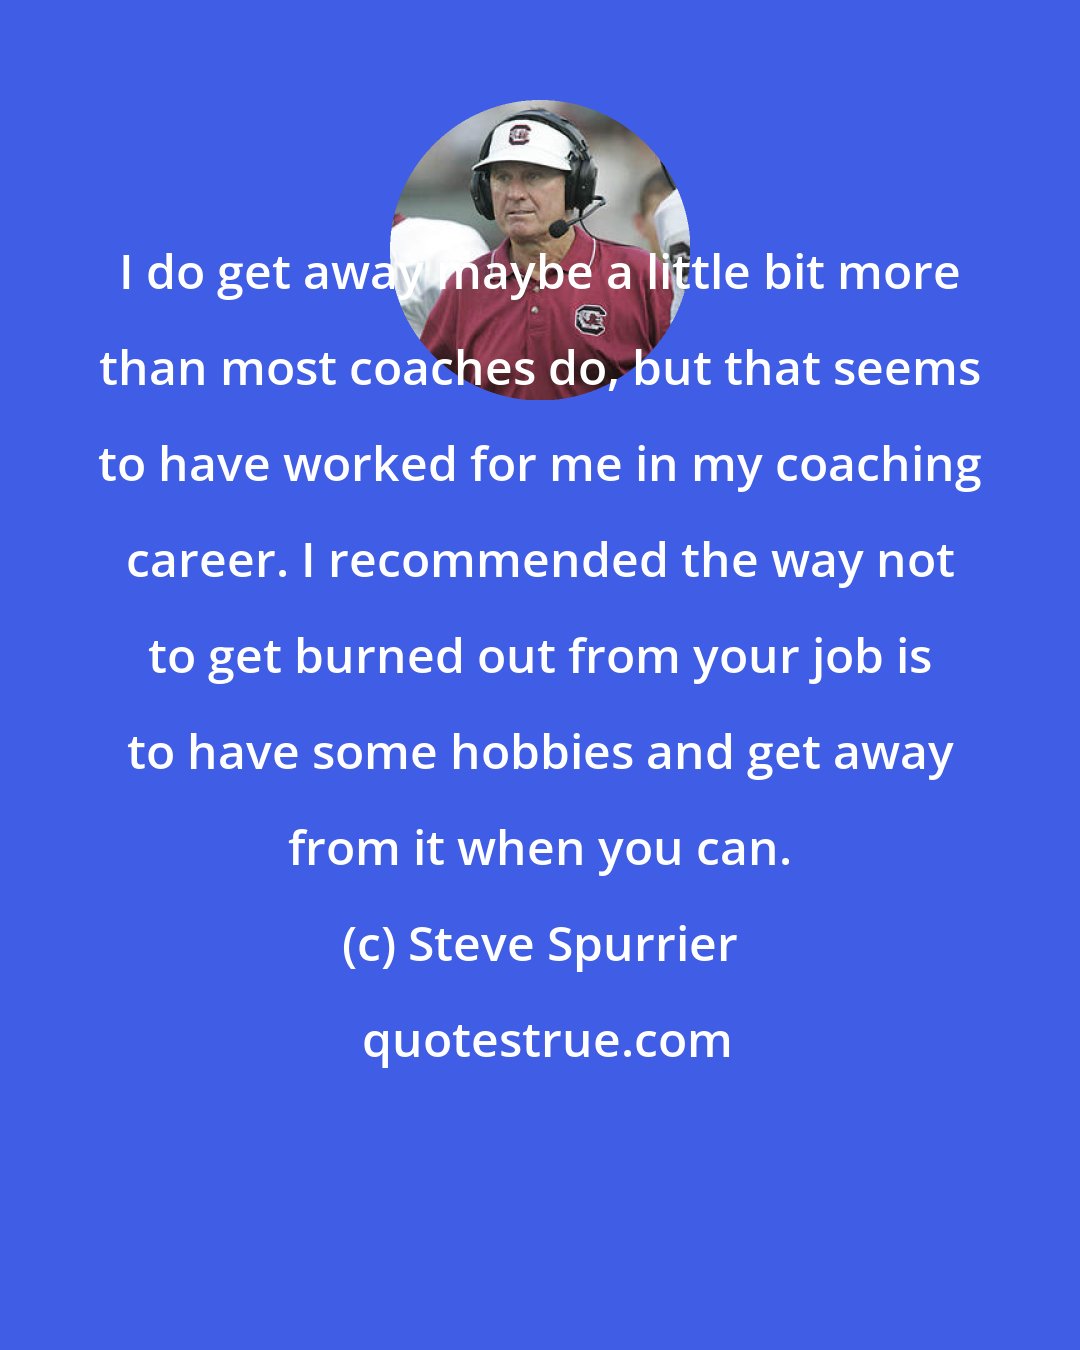 Steve Spurrier: I do get away maybe a little bit more than most coaches do, but that seems to have worked for me in my coaching career. I recommended the way not to get burned out from your job is to have some hobbies and get away from it when you can.